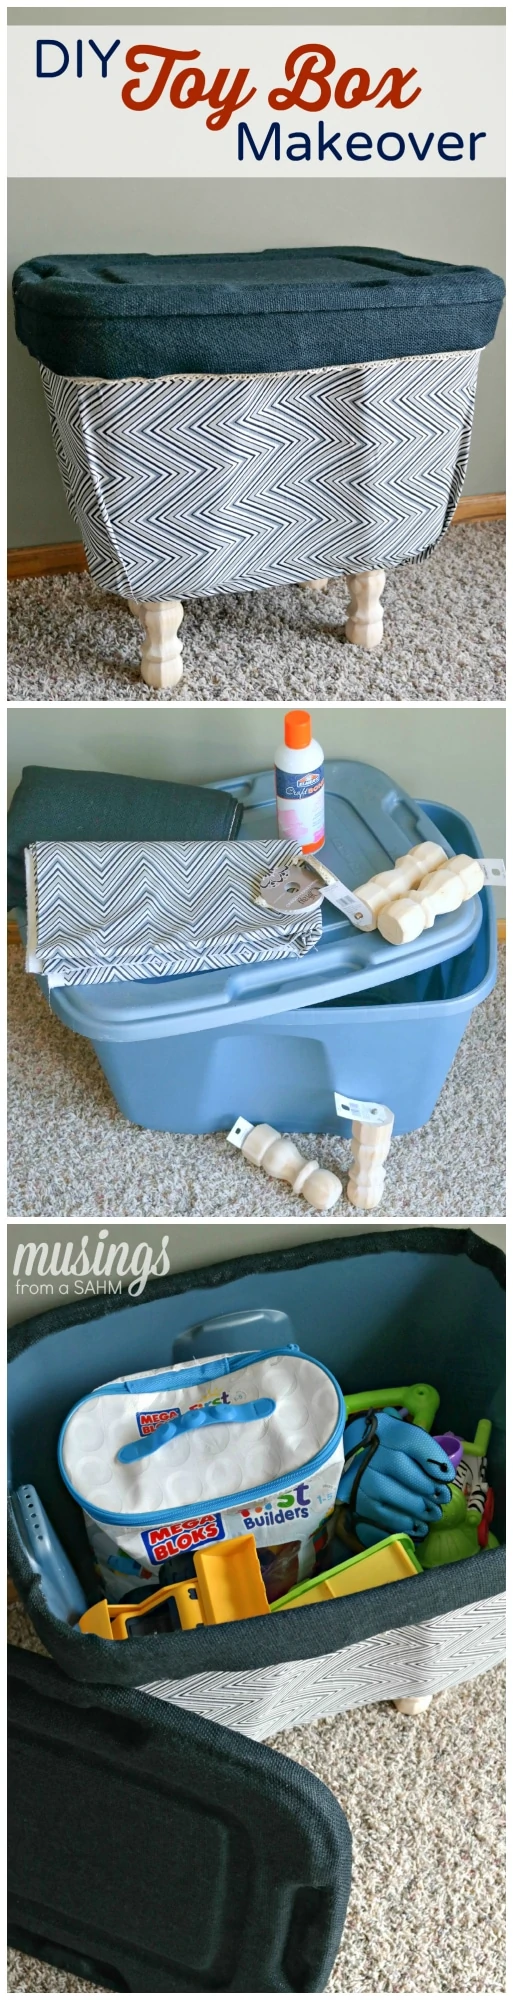 DIY Toy Box Makeover: How to turn an ugly plastic bin into a decorated toy box!